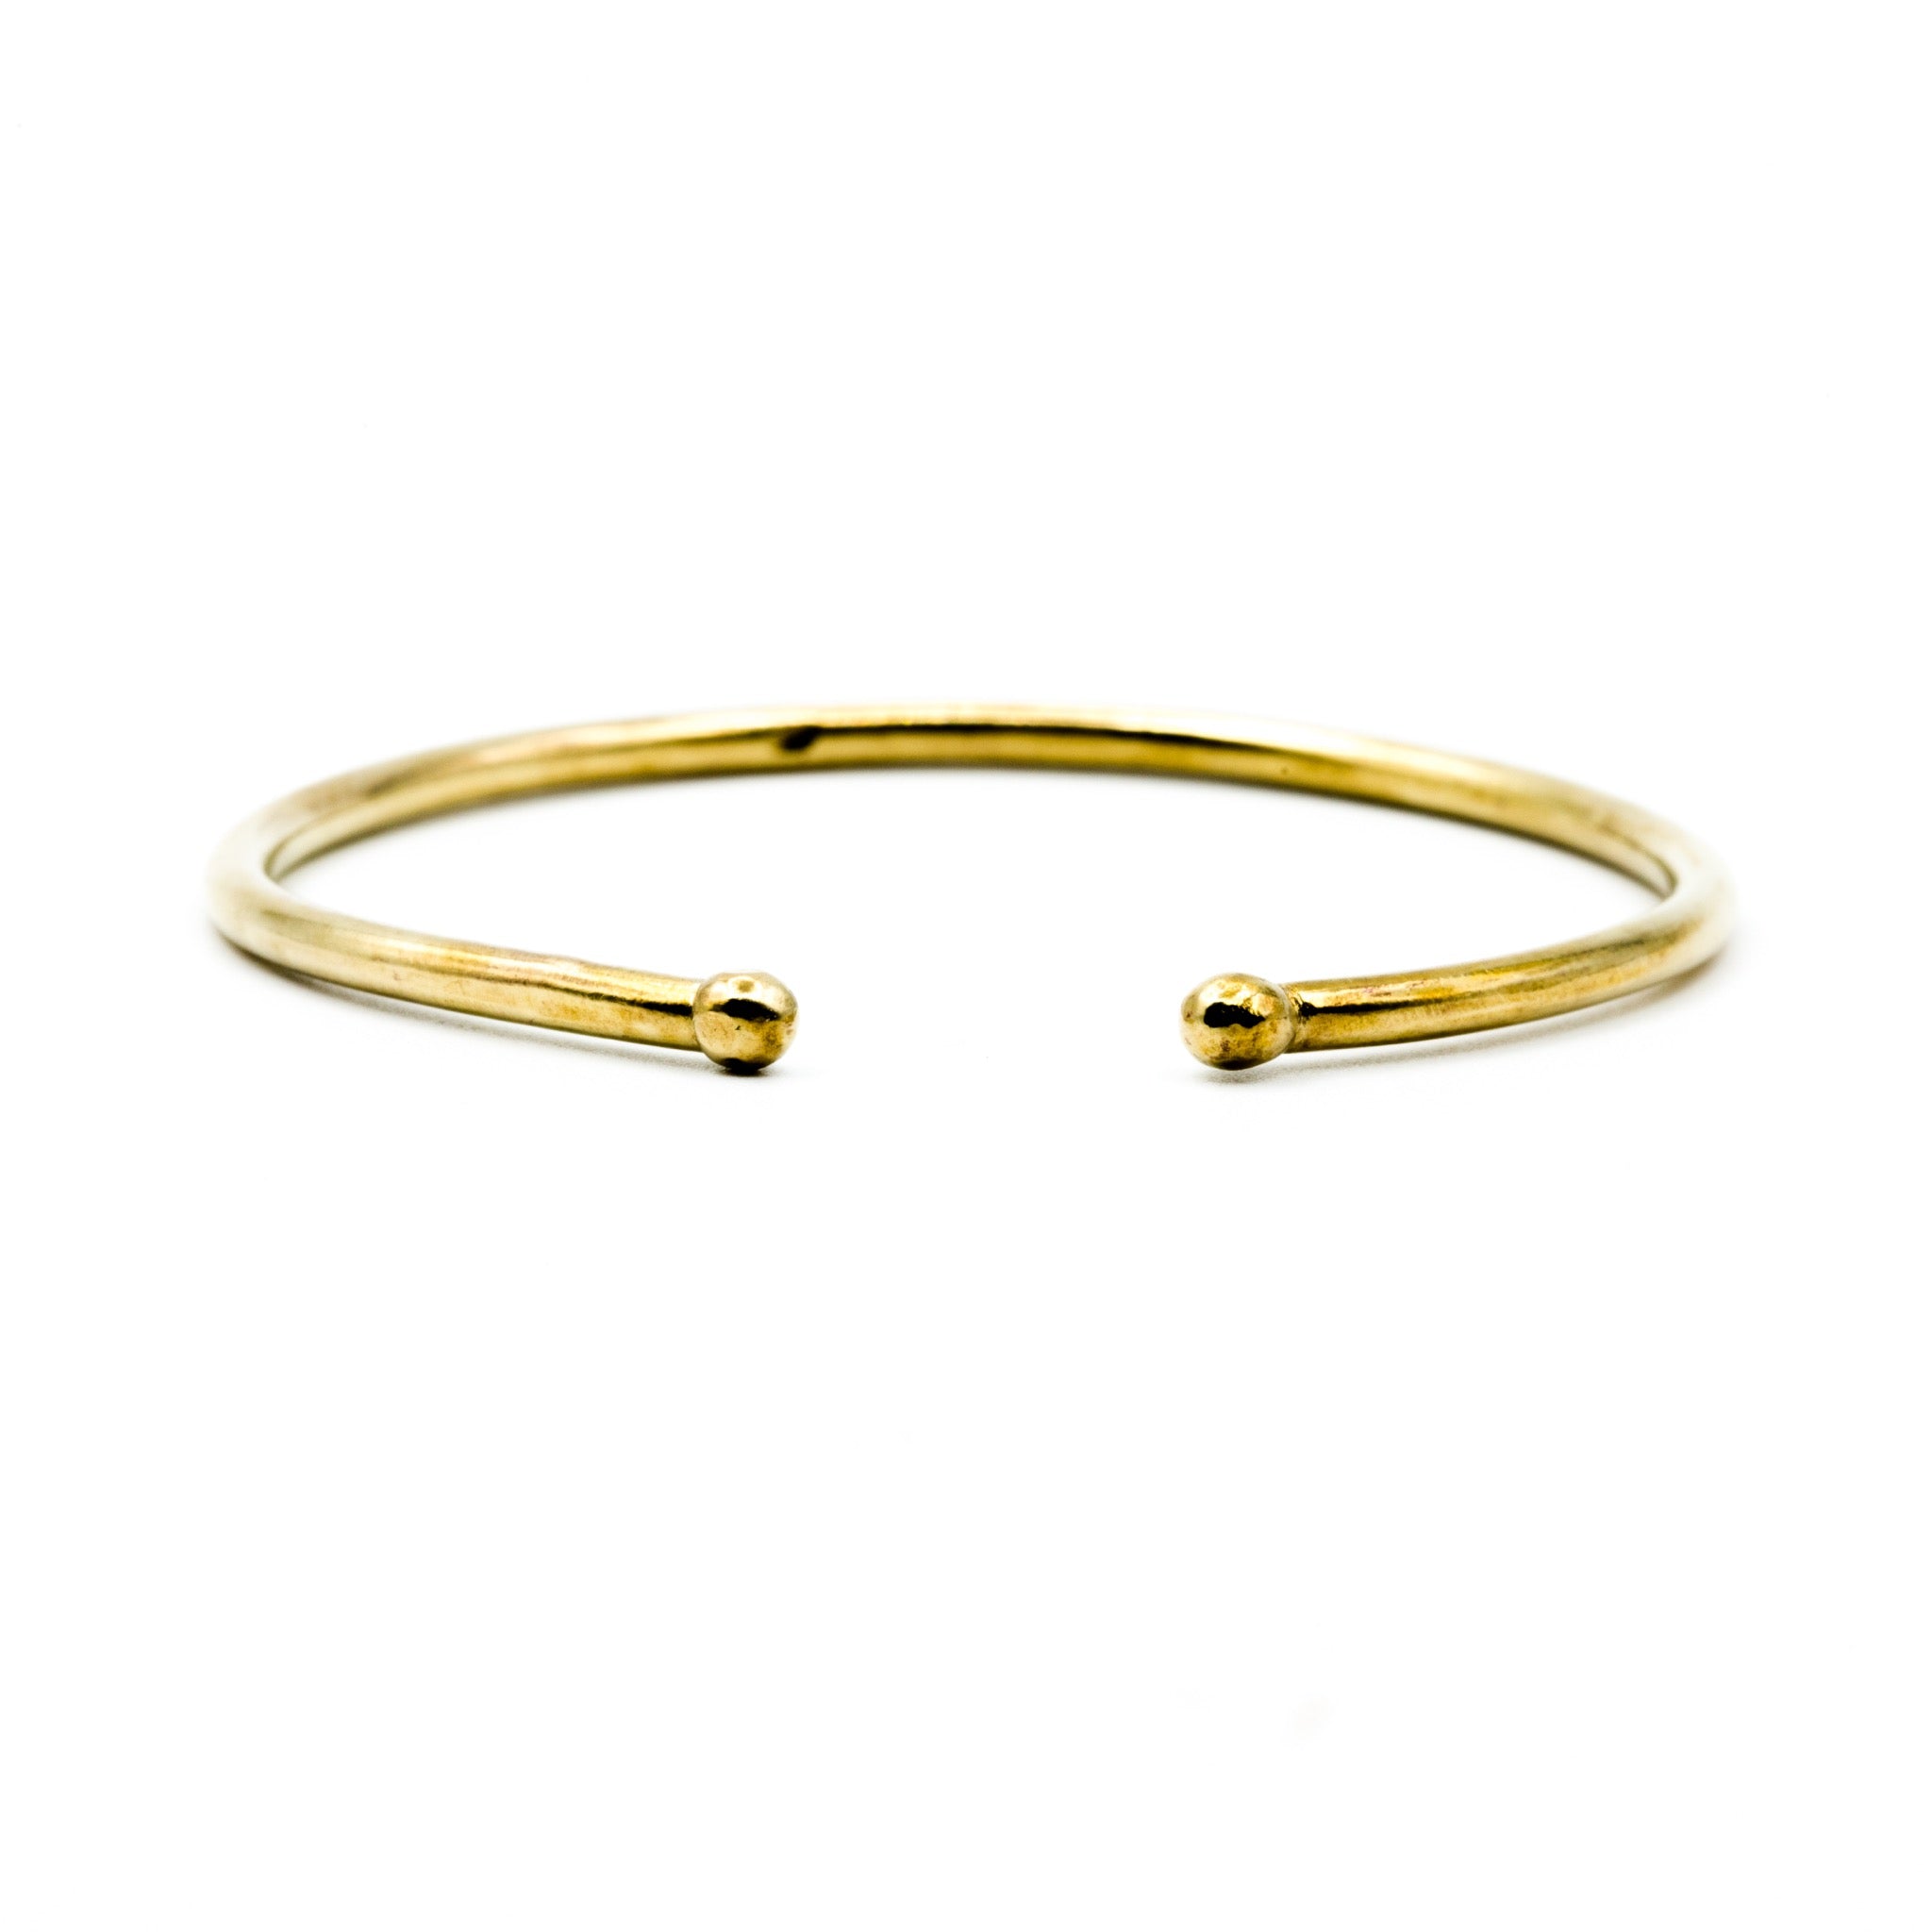 brass cuff with balled ends on white background